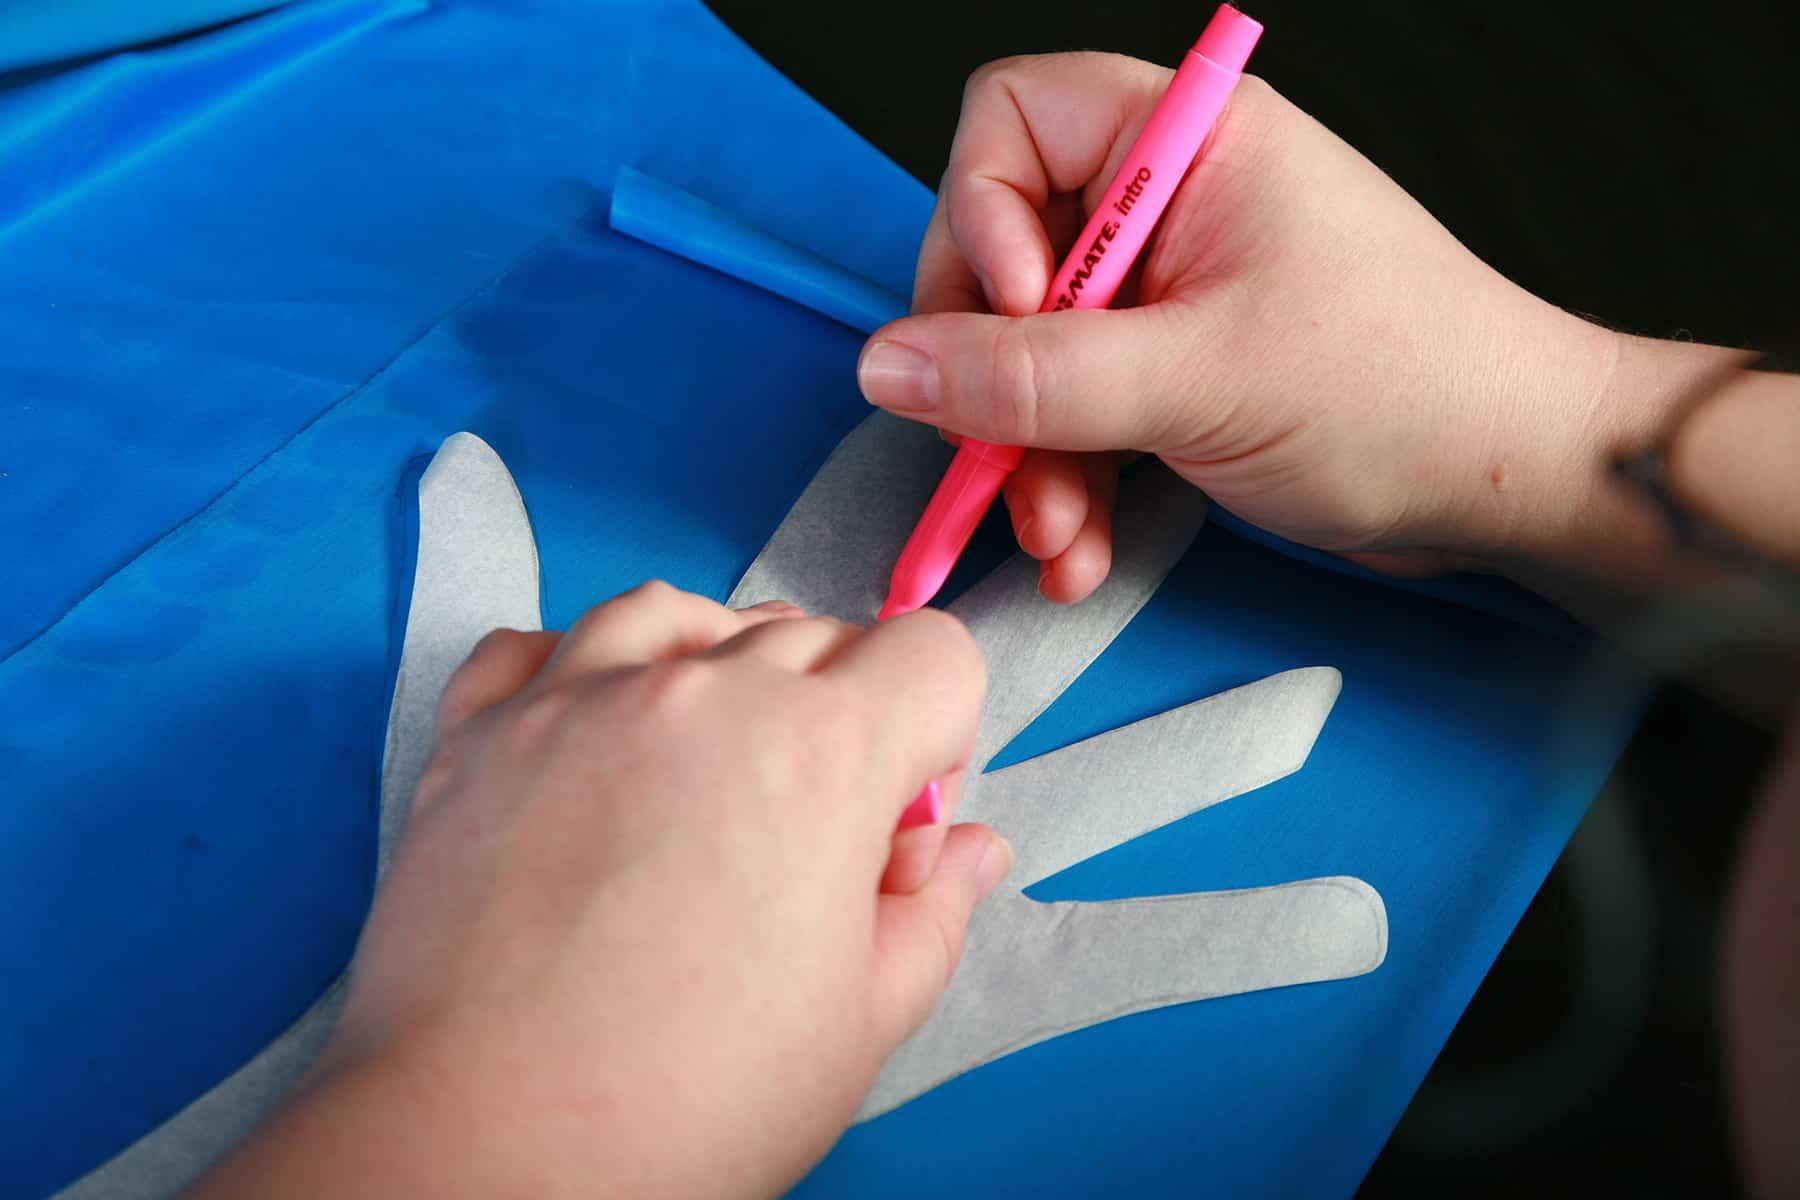 A glove pattern is being traced onto blue spandex fabric.